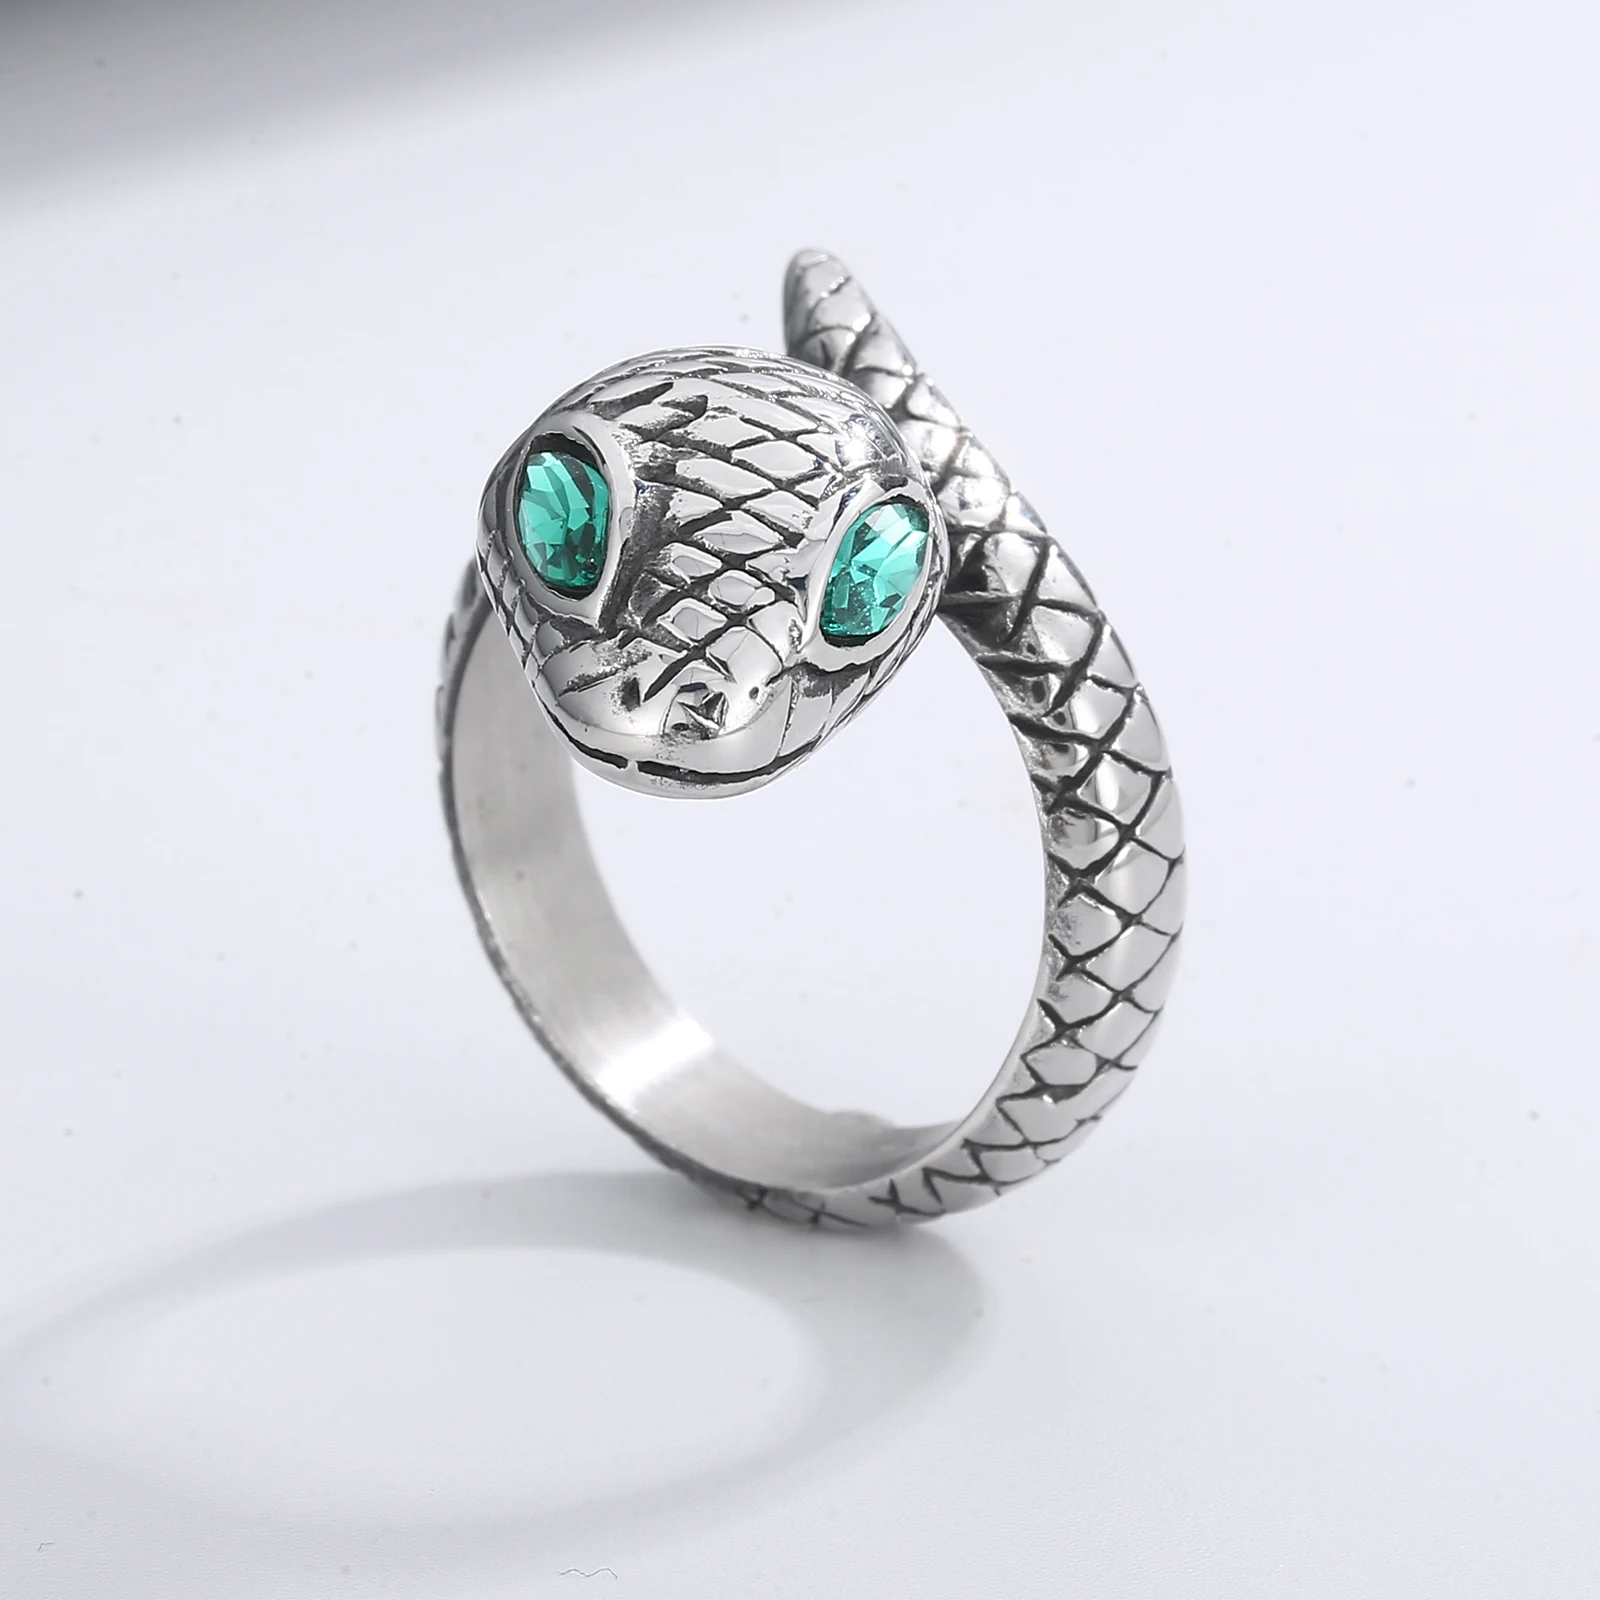 

HAOYI Punk Green Eyes Snake Rings For Men Fashion Silver Color Stainless Steel Vintage Jewelry Gift